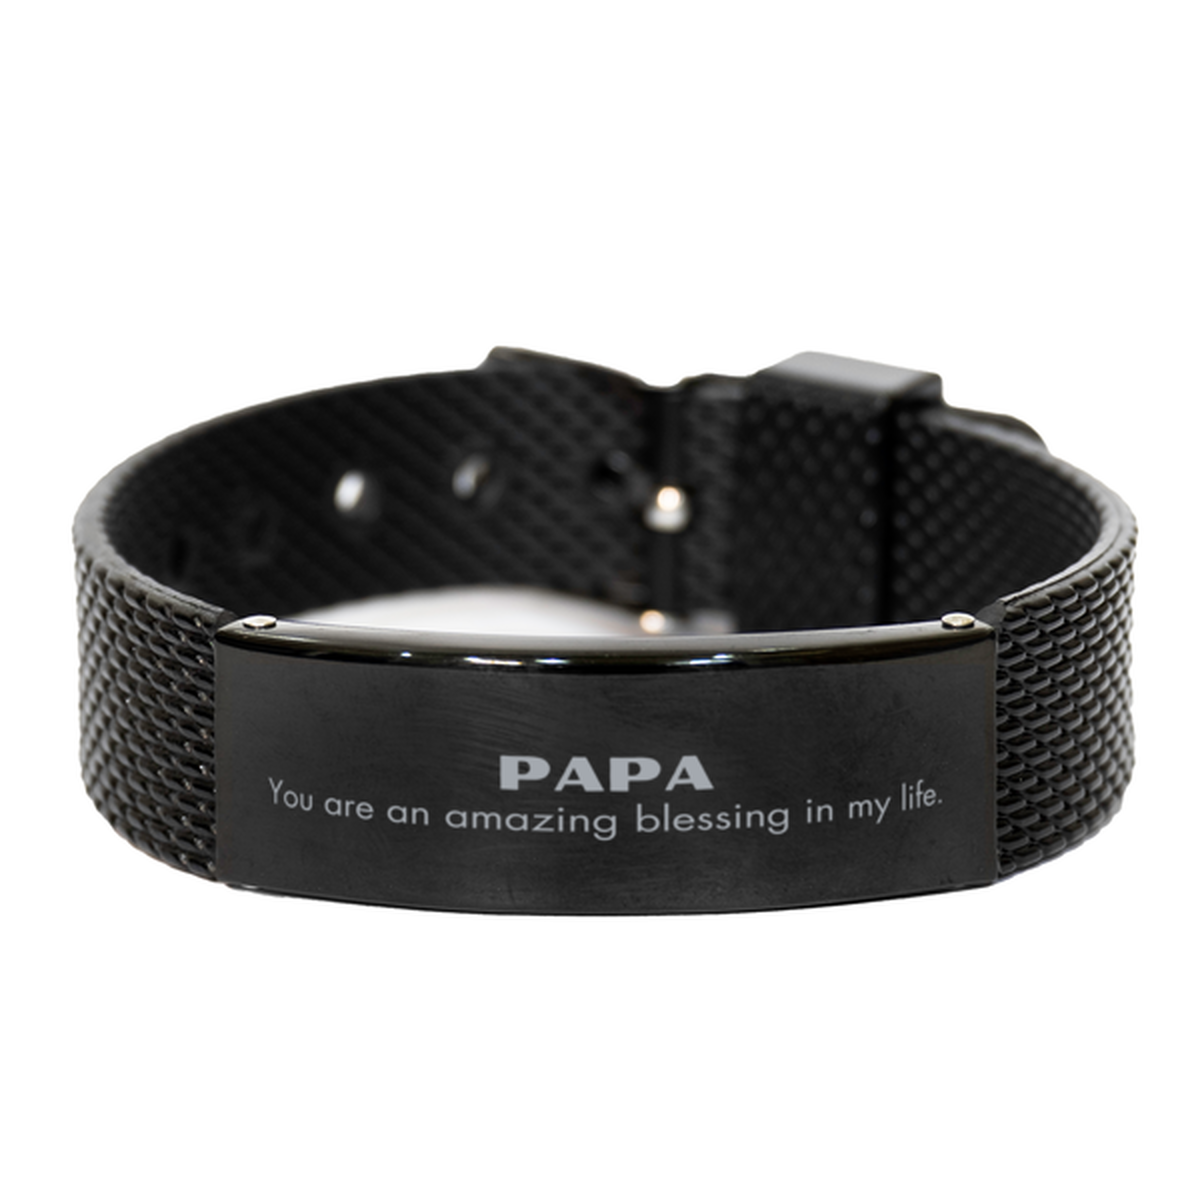 Papa Black Shark Mesh Bracelet, You are an amazing blessing in my life, Thank You Gifts For Papa, Inspirational Birthday Christmas Unique Gifts For Papa